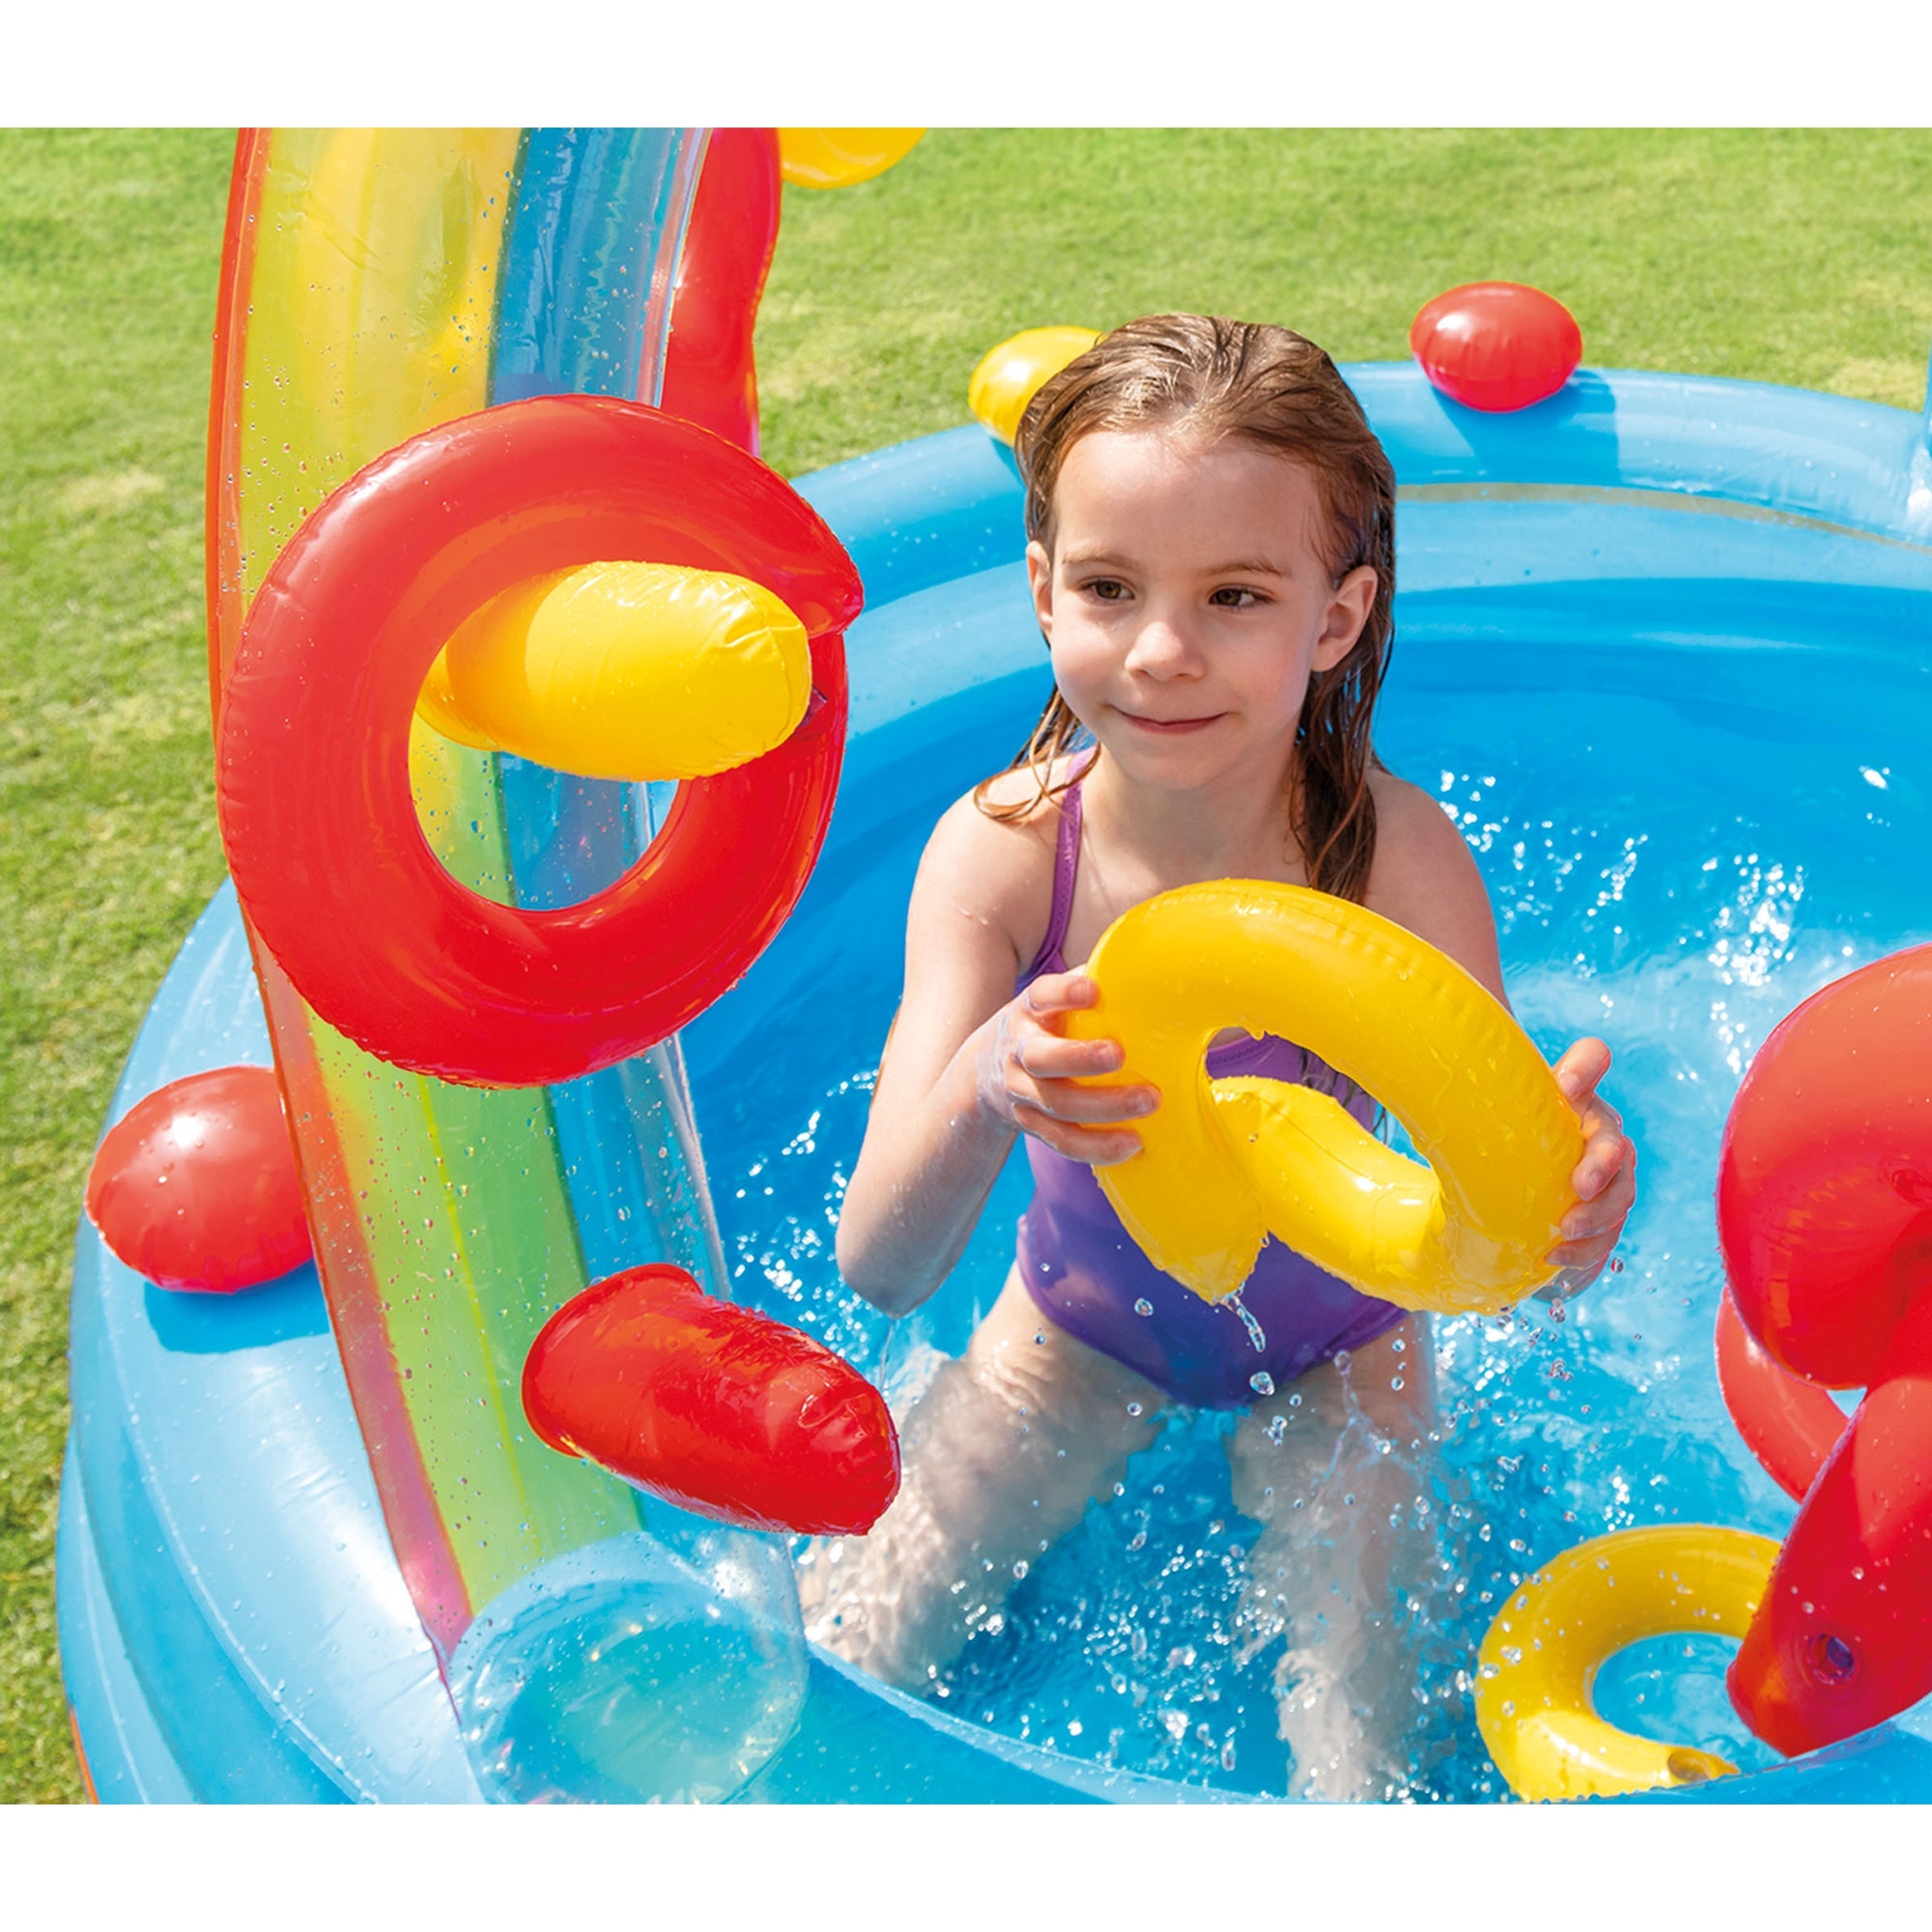 Intex-9.75-x-6.3-Foot-Rainbow-Slide-Inflatable-Pool-and-Water-Slide-Ring-Center-Swimming-Pools